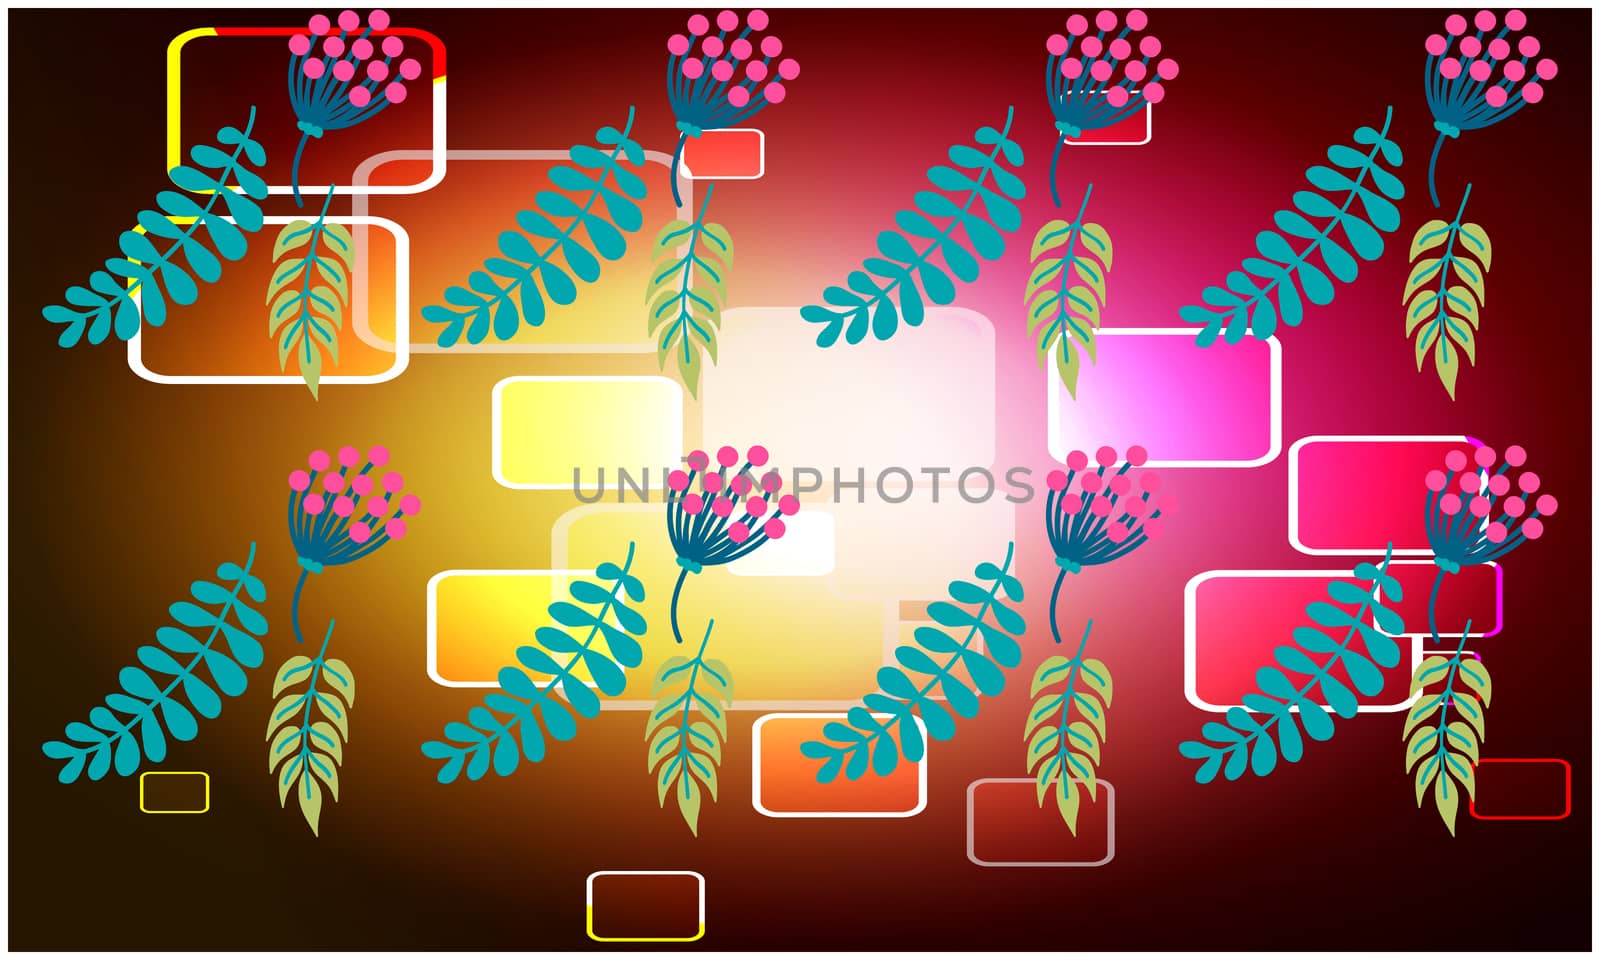 digital textile design of leaves on abstract background